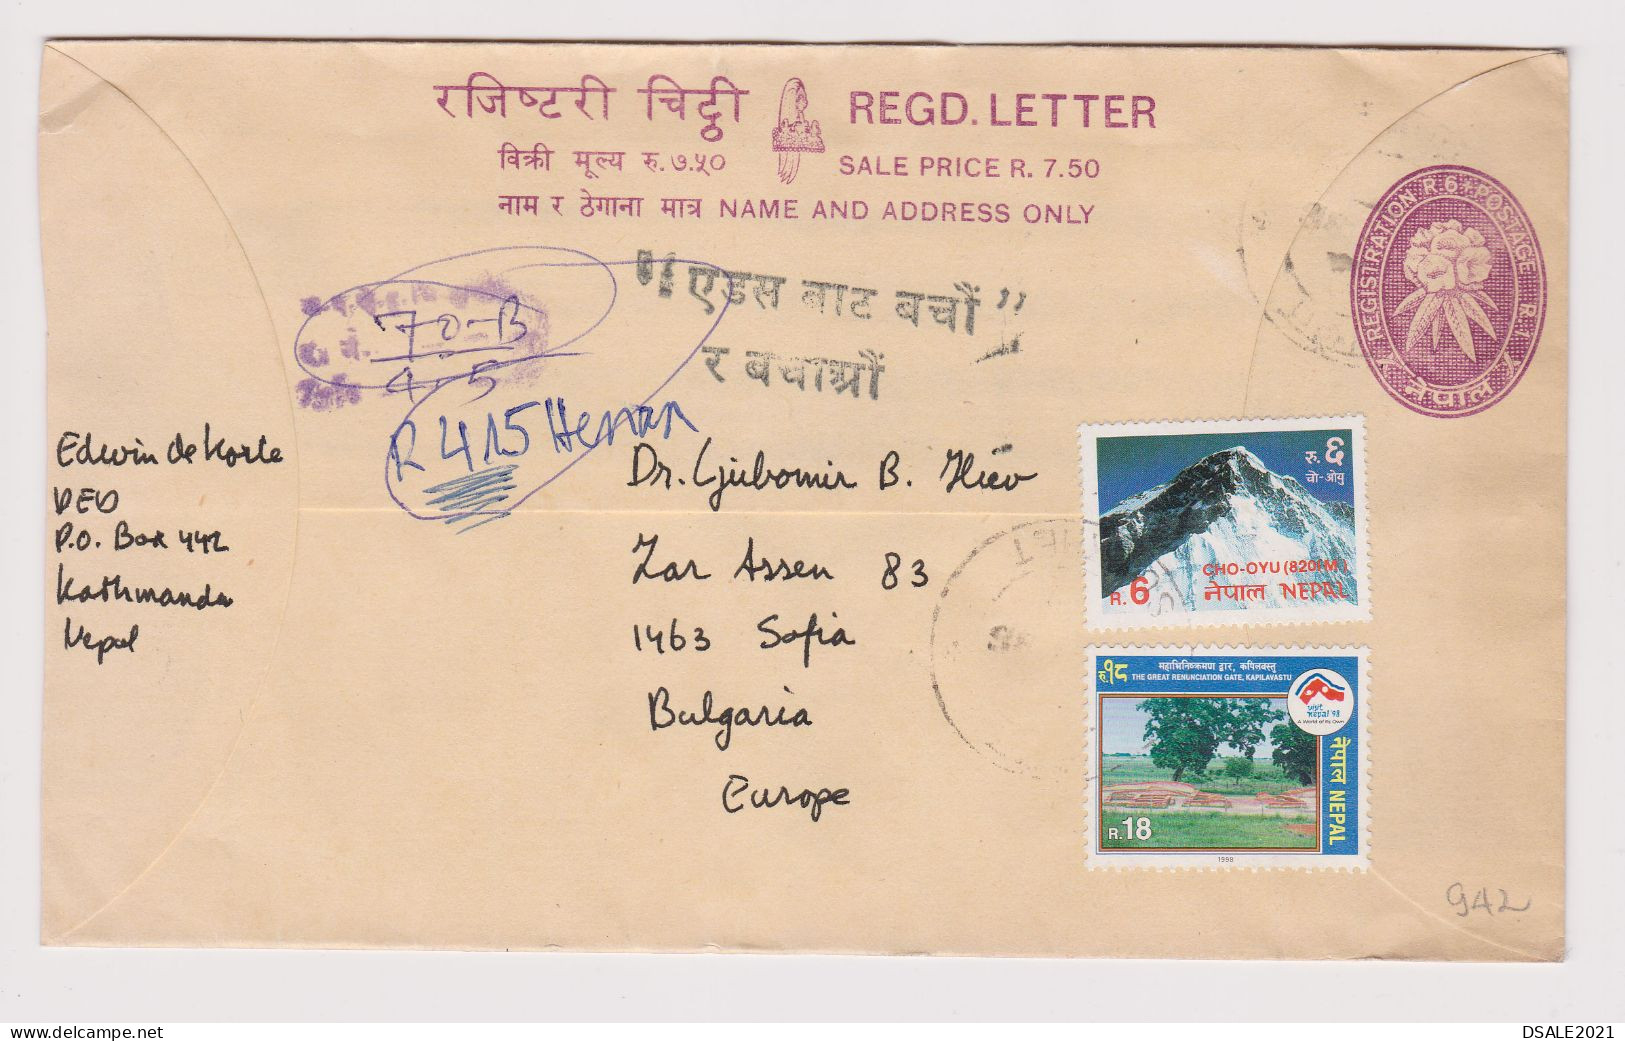 NEPAL 1990s Registered Stationery Cover with Topic Stamps Sent Abroad to Bulgaria (942)